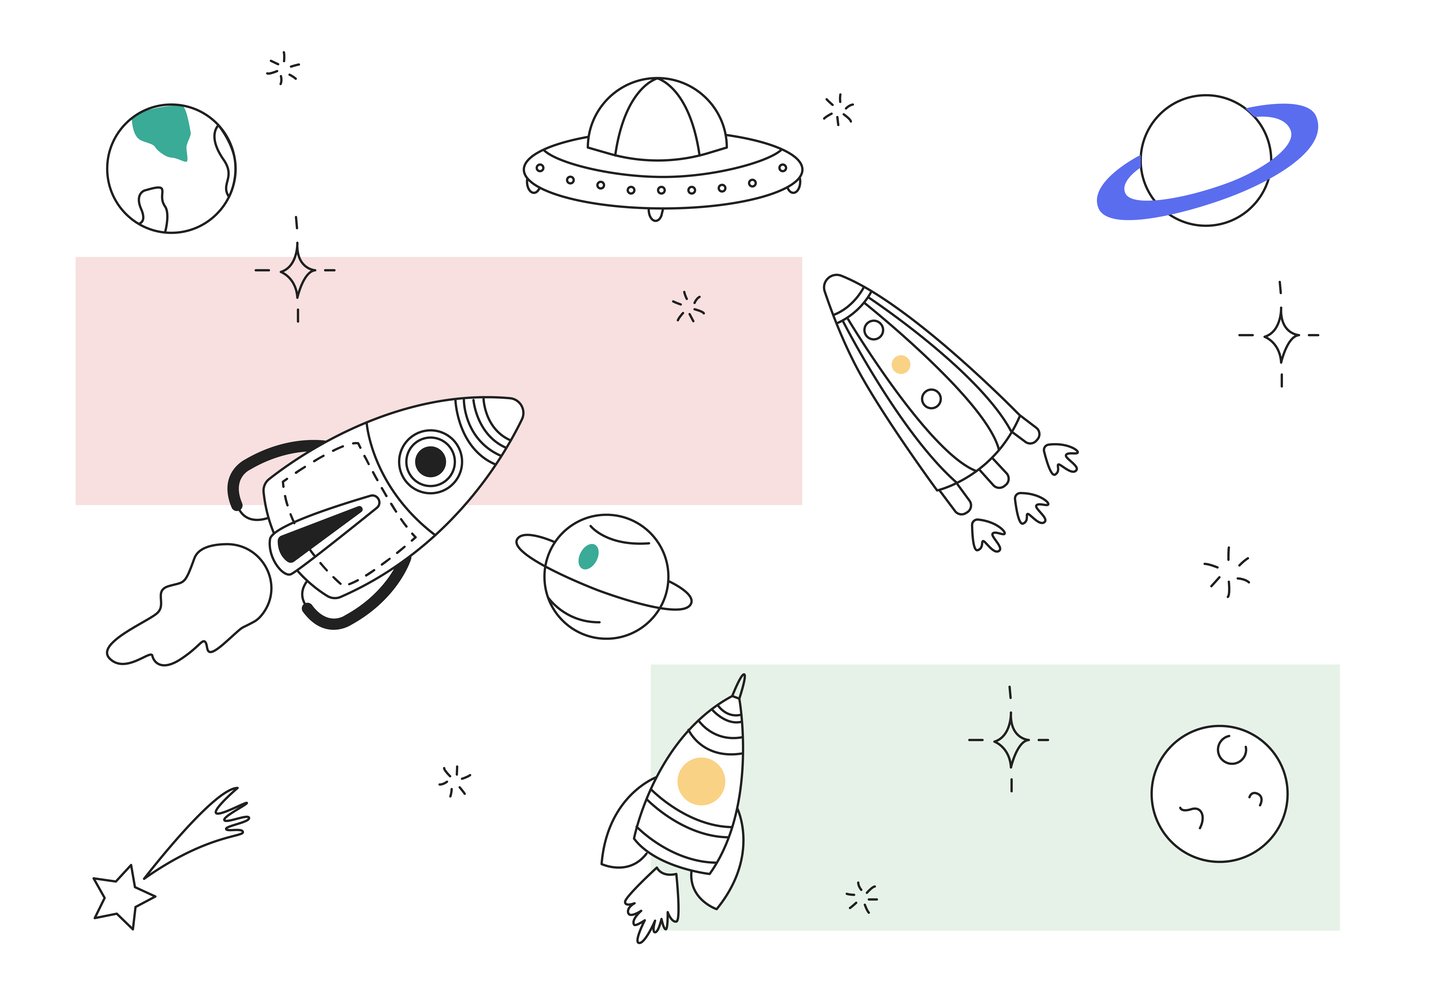 essential hubspot integrations - image of spaceships